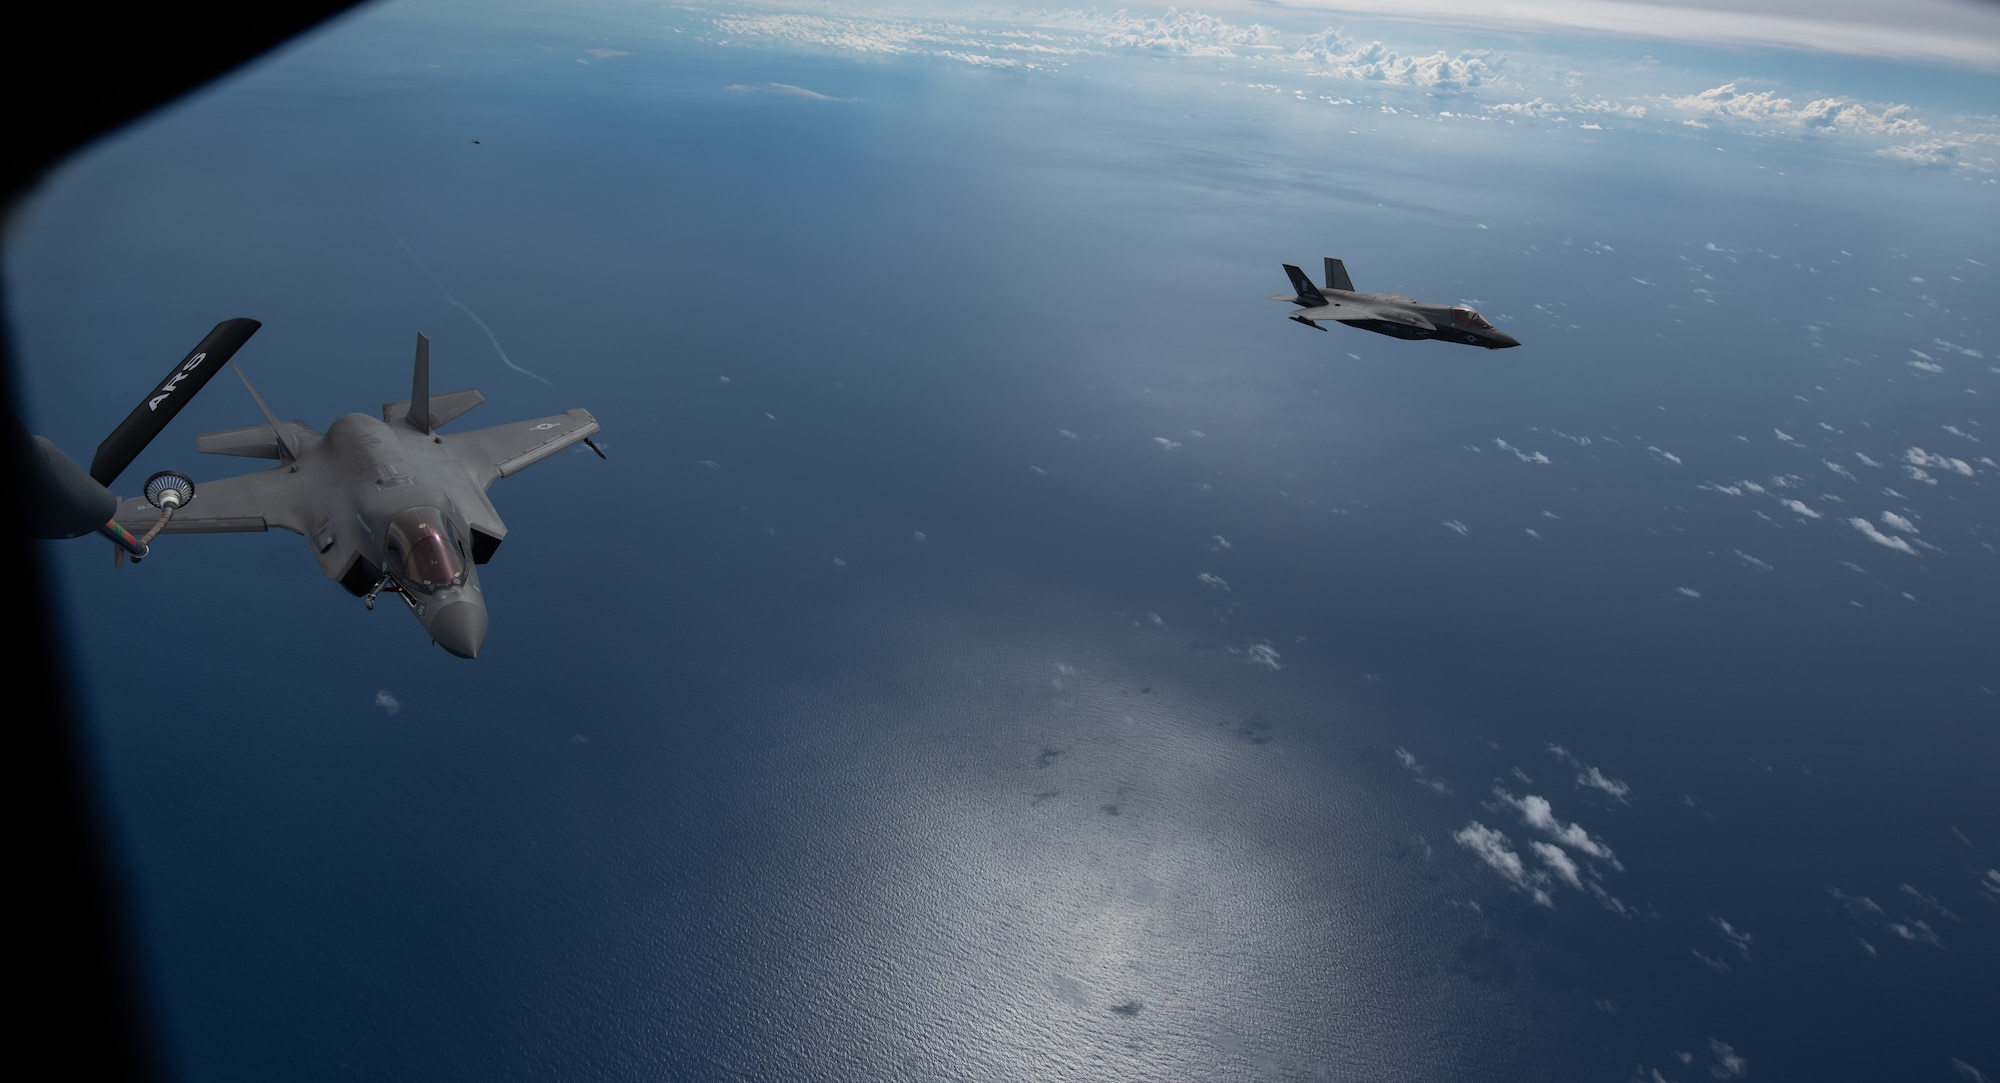 U.S. Marine Corps F-35B Lightning II’s,  Marine Fighter Attack Squadron based out of Marine Corps Air Station MCAS Iwakuni, Japan, prepare to receive fuel from a KC-135 Stratotanker assigned to the 909th Air Refueling Squadron, Kadena Air Base, Japan during a Large Scale Global Exercise 21 mission over the western Pacific Ocean, Aug. 18, 2021. The U.S. has the ability to operate from the sanctuary of bases across the region and projecting sustained combat power. (U.S. Air Force photo by Tech. Sgt. Micaiah Anthony)